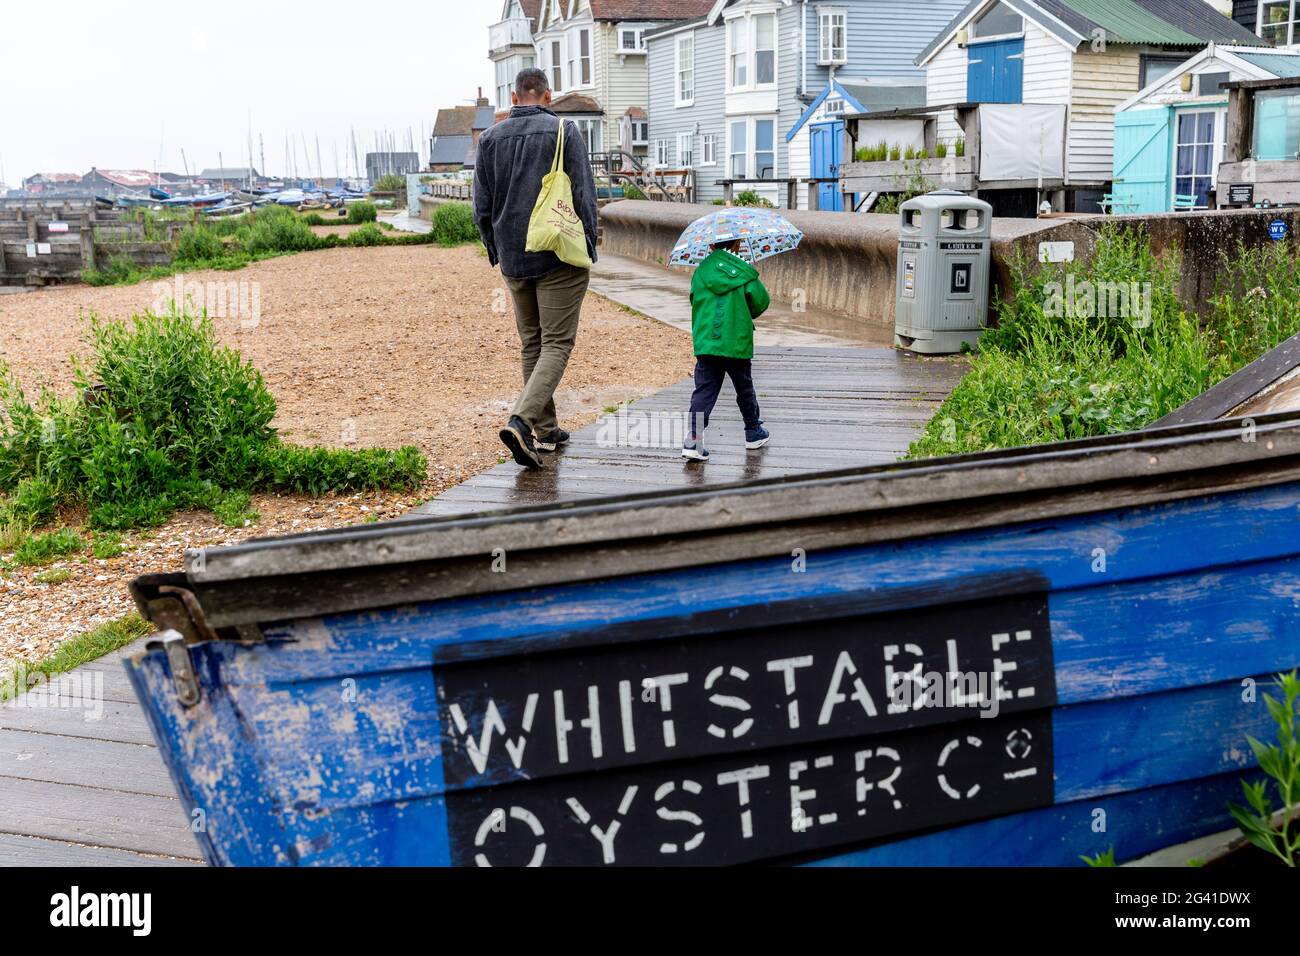 Whitstable, United Kingdom, June 18, 2021. People walk at the beach  in Whitstable, a coastal touristic town in south-eastern England as vary poor rainy weather disturb holidaymakers as the holiday season begins. One of the strictest Coronavirus lockdowns in the world  is partially lifted as the United Kingdom managed to vaccinate a large part of the population and the number of Covid cases is low. People are able to socialize in limited numbers and are able to book holidays. Stock Photo